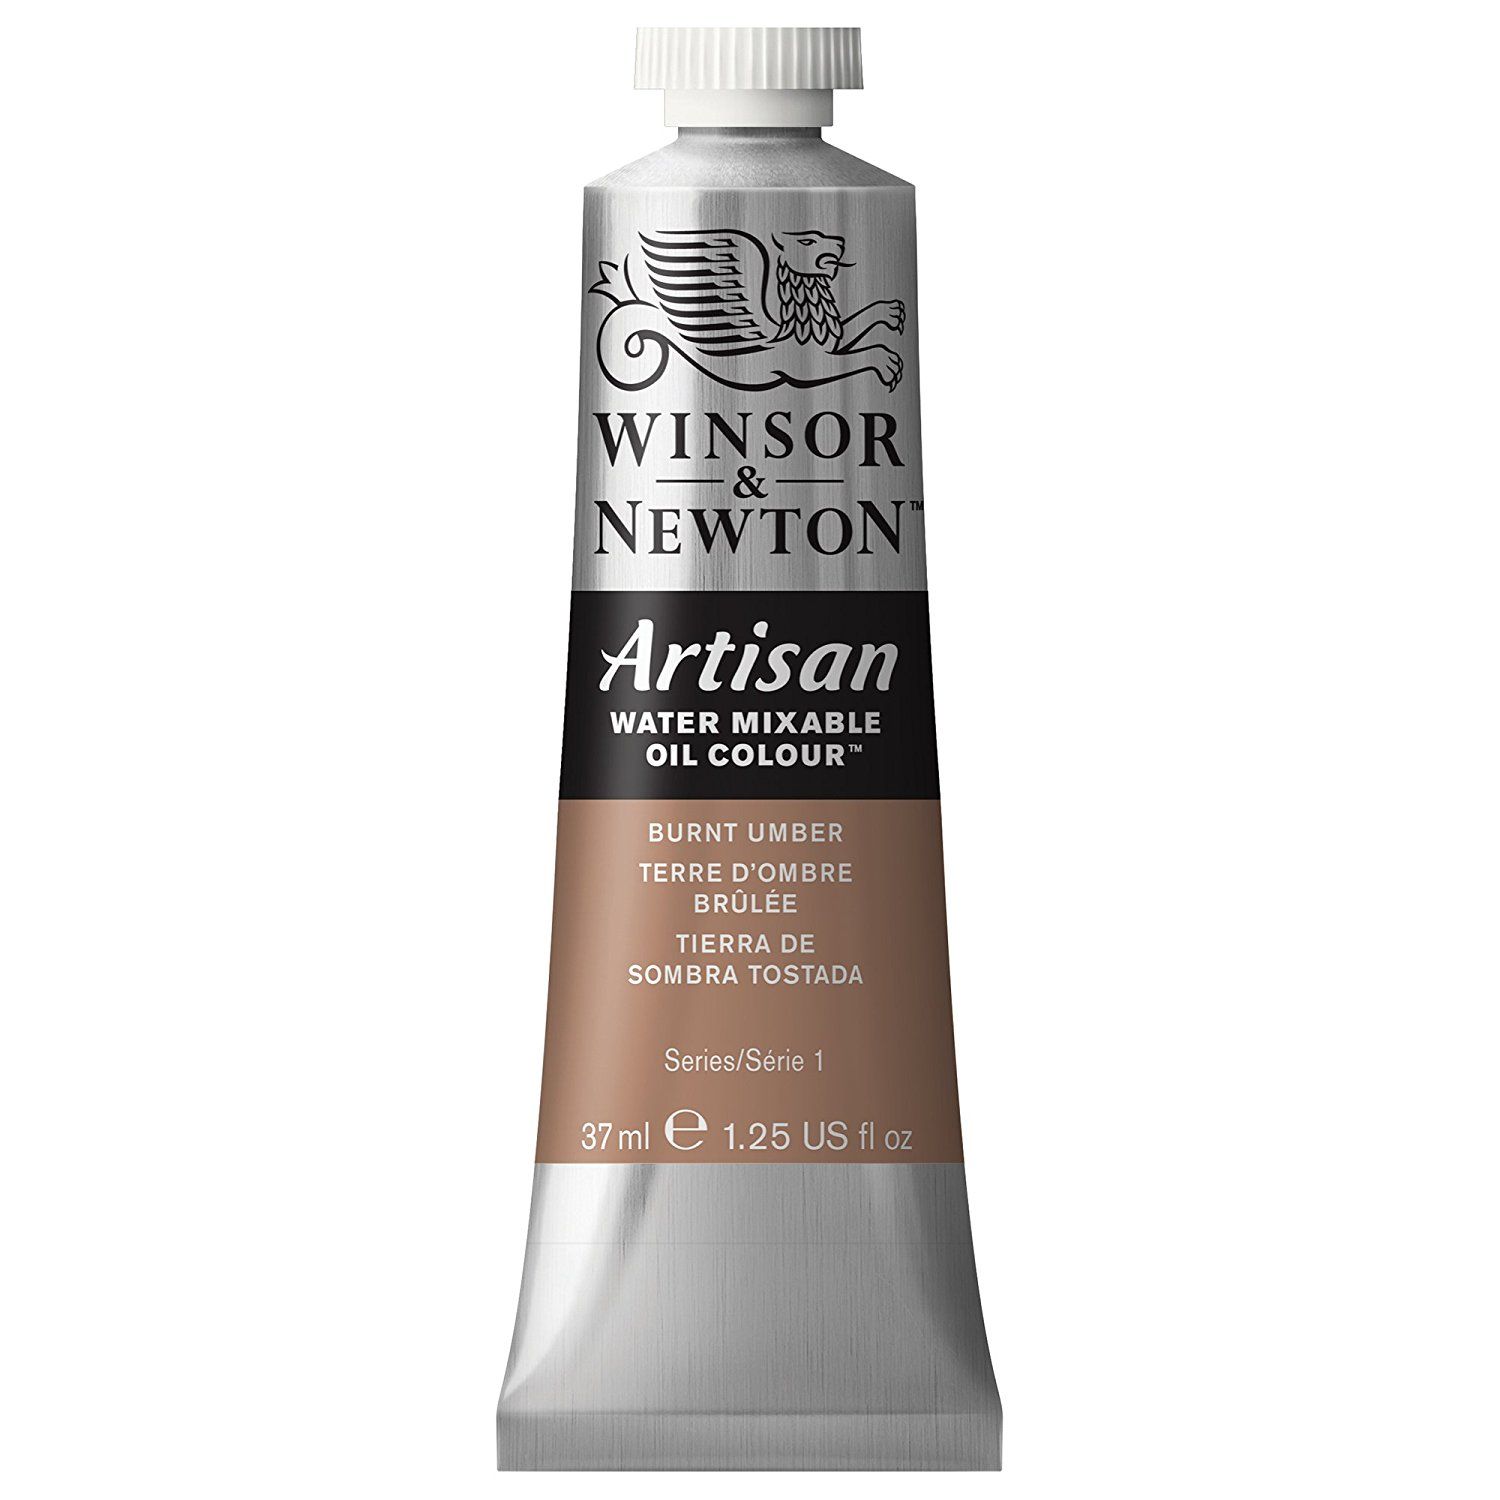 Artisan Water Mixable Oil - Burnt Umber 37ml